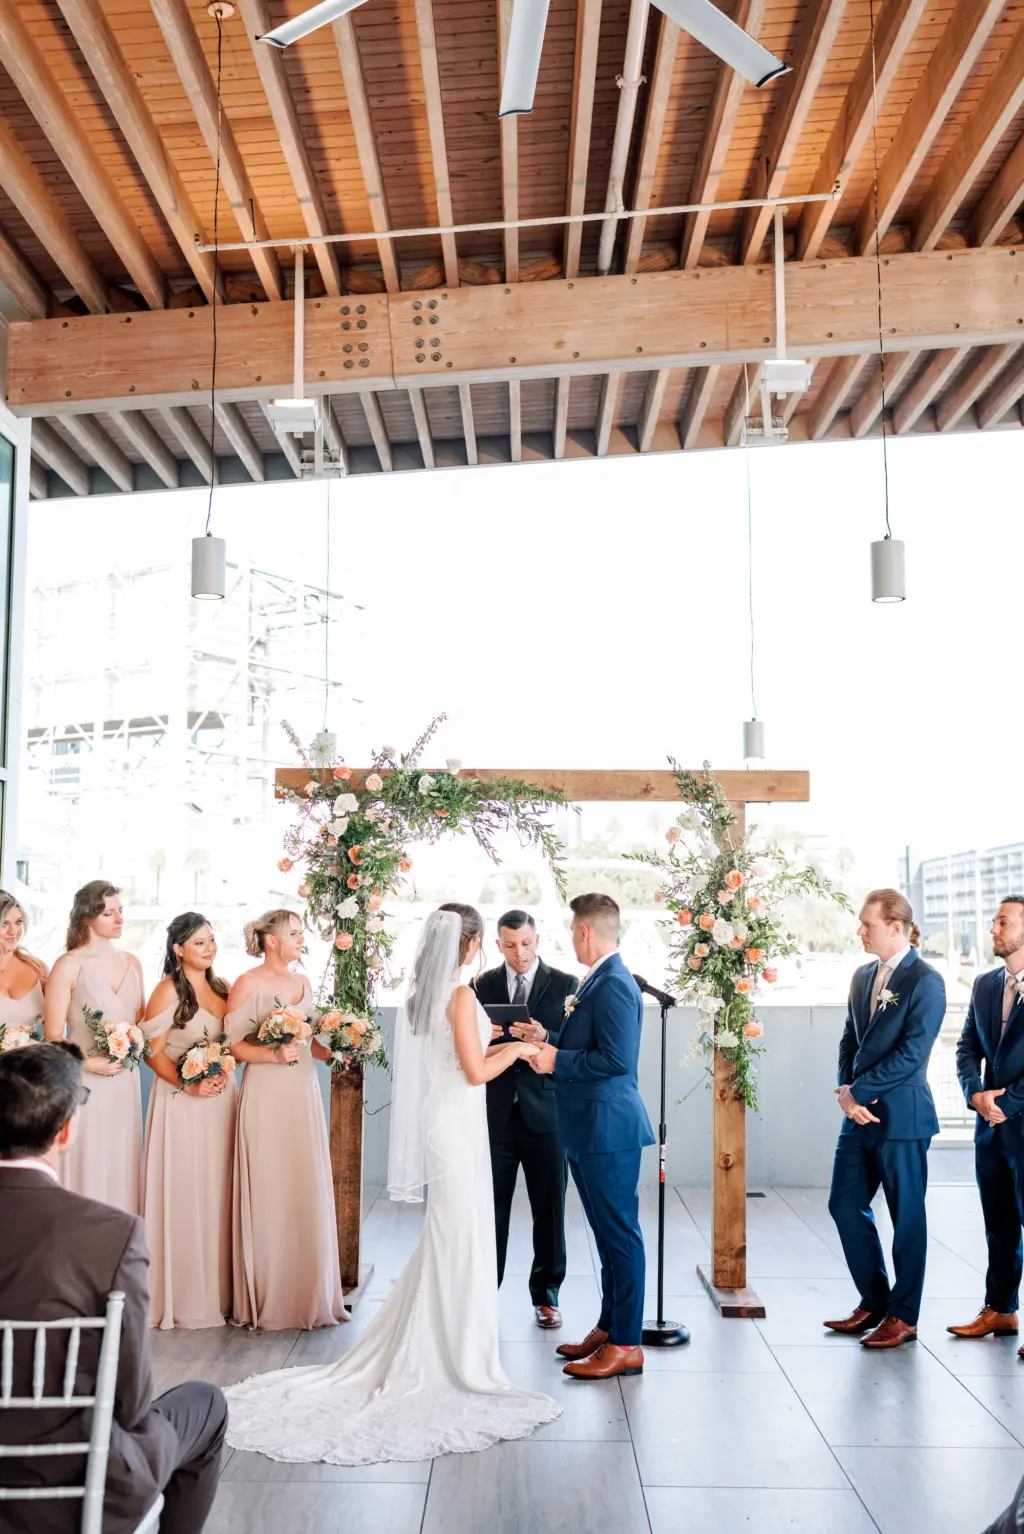 Bride and Groom Vow Exchange Wedding Portrait | Rustic Wooden Arch with Pink, Orange, and White Roses and Greenery Ceremony Decor Ideas | Venue Tampa River Center